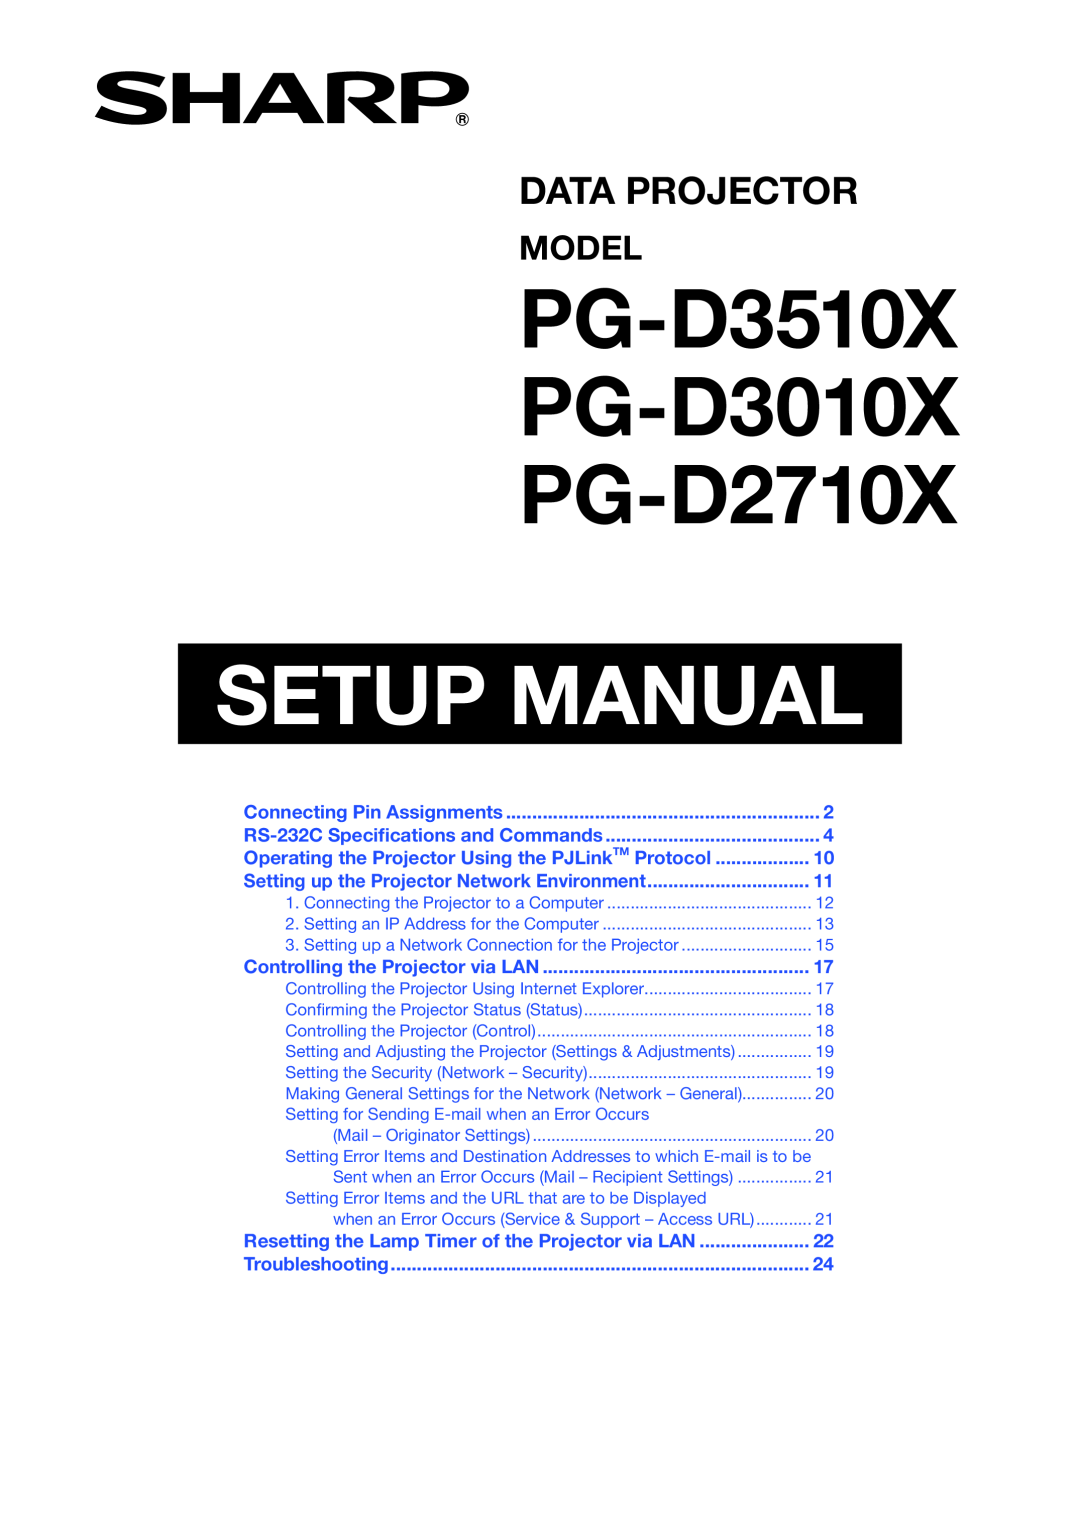 Sharp specifications PG-D3510X PG-D3010X PG-D2710X, Setup Manual, Data Projector, Model, Connecting Pin Assignments 